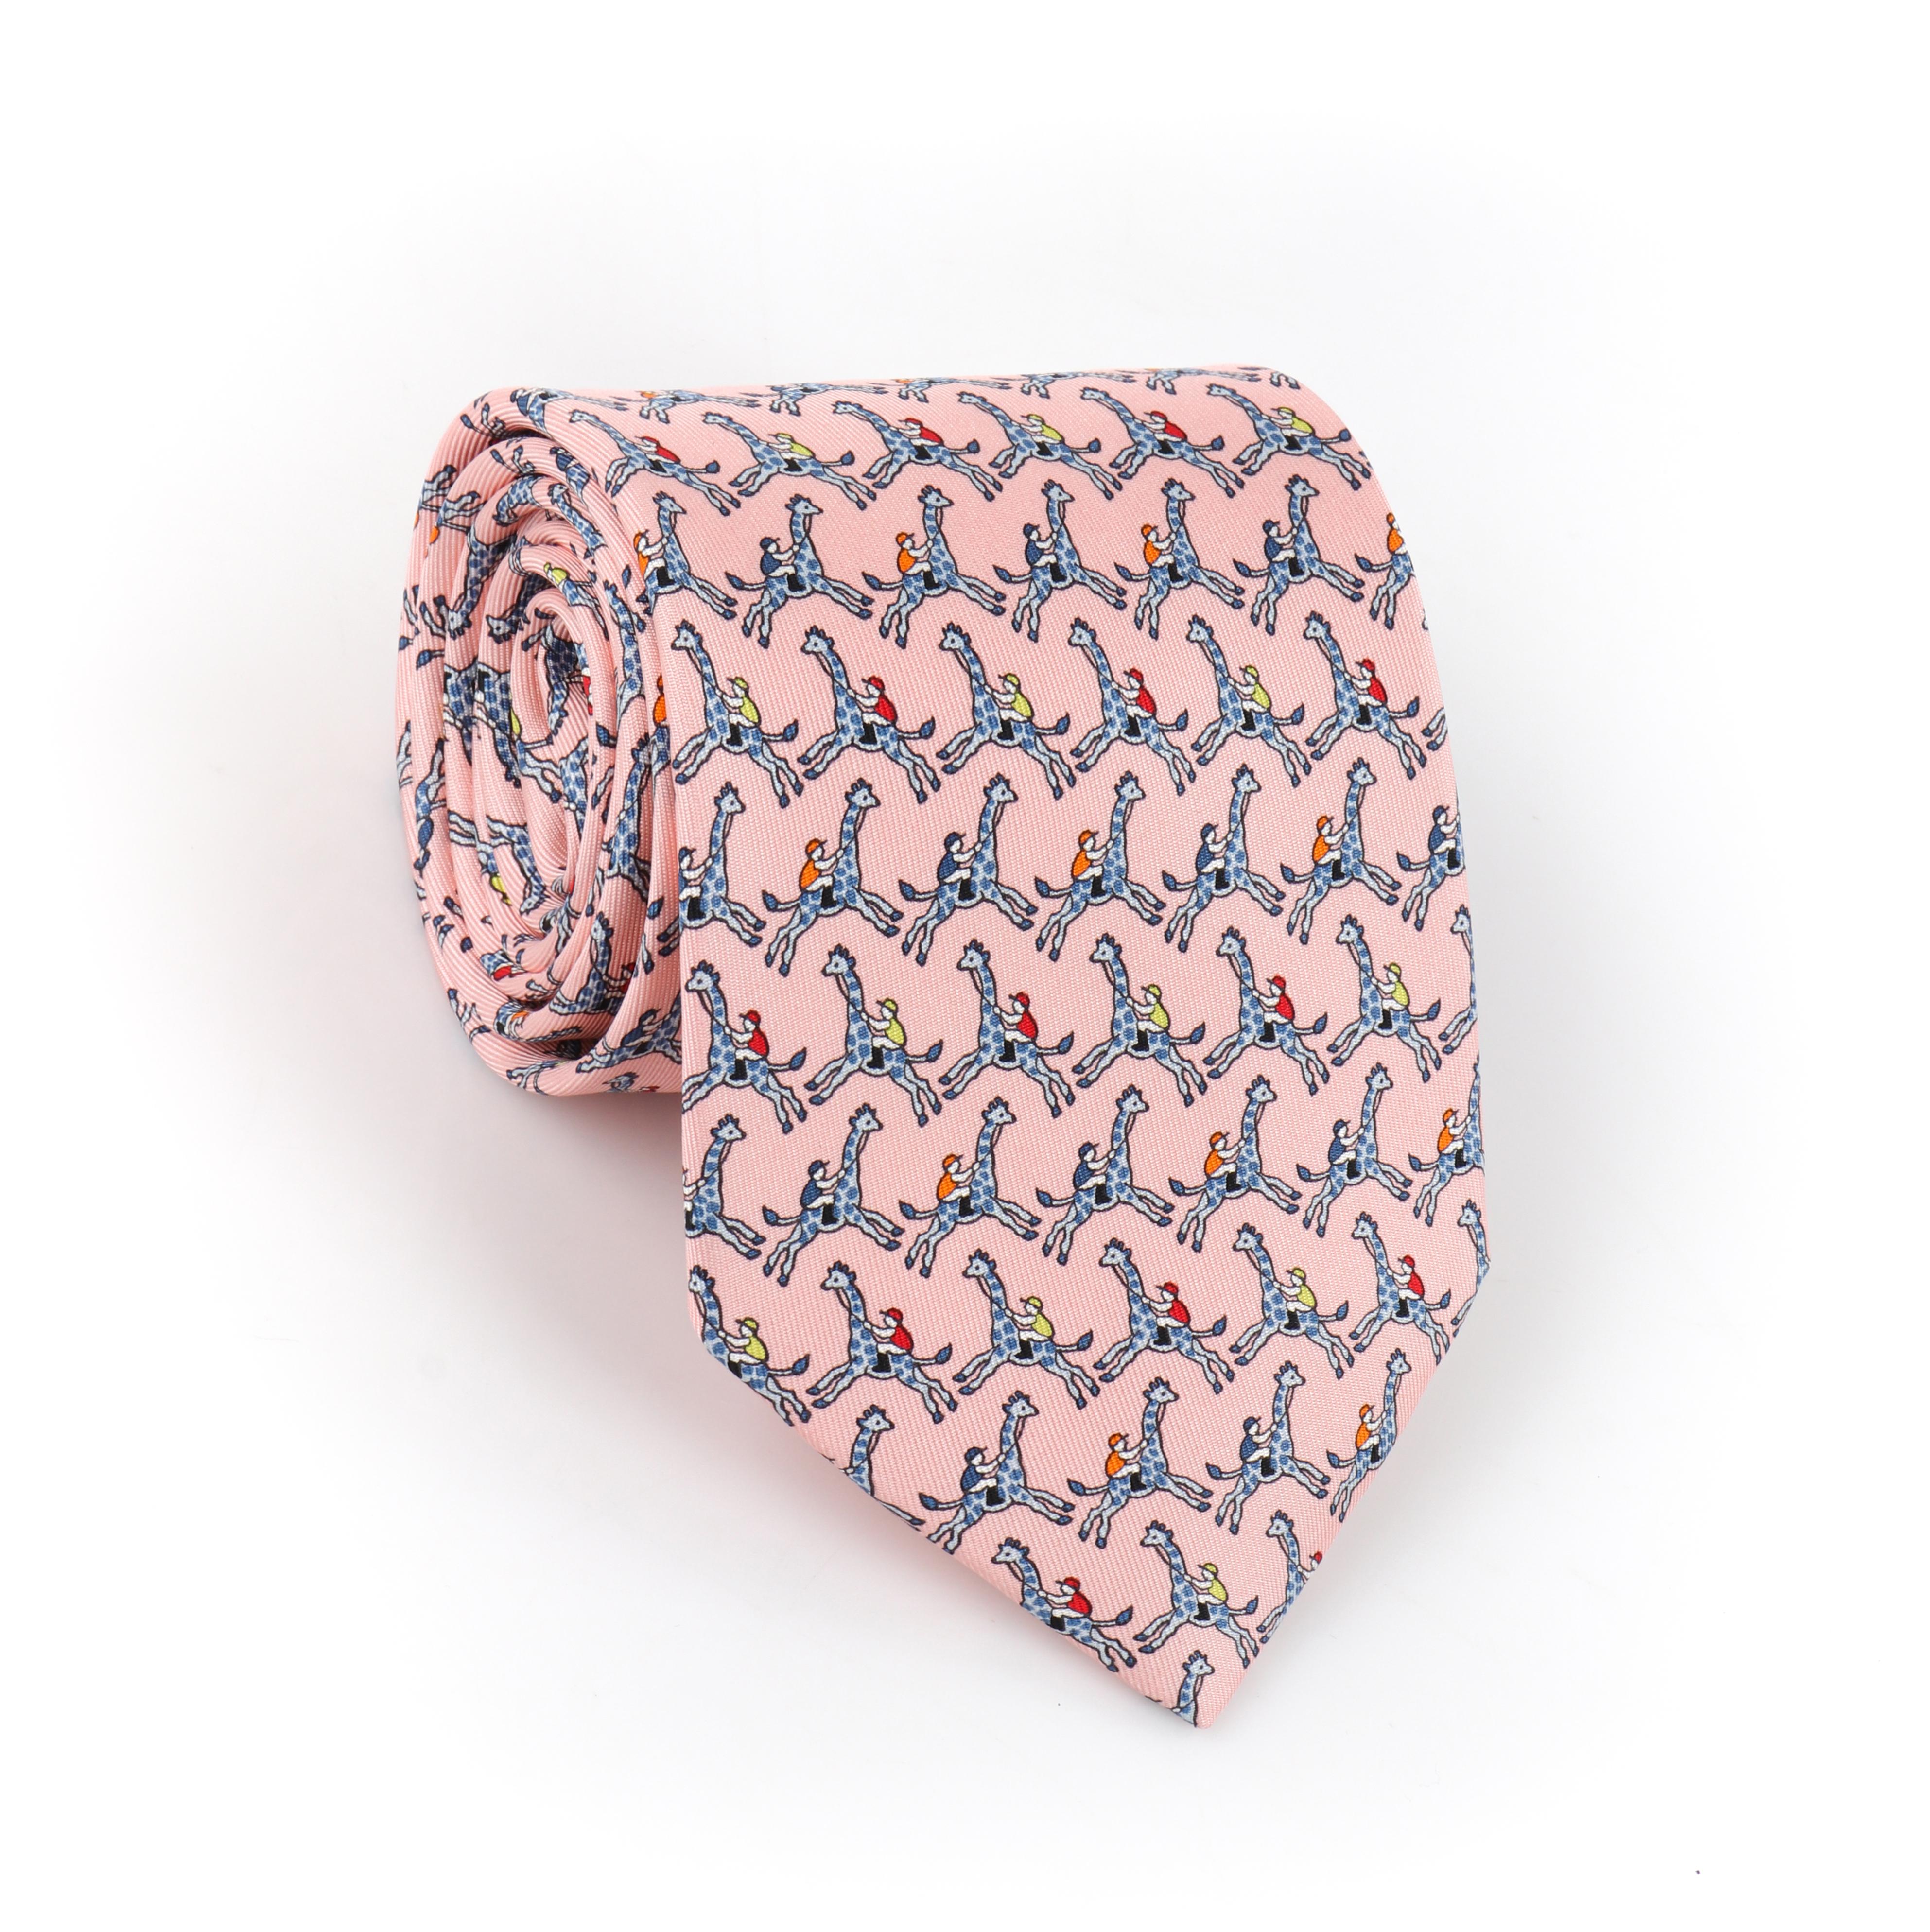 HERMES Men's Pink Blue Jockey Giraffe Riding 5-Fold Silk Necktie Tie 5440 FA
 
Brand/Manufacturer: Hermes Paris
Style: 5-Fold necktie
Color(s): Shades of pink, blue, orange, red, yellow
Lined: Yes
Marked Fabric Content: “100% Silk” 
Additional